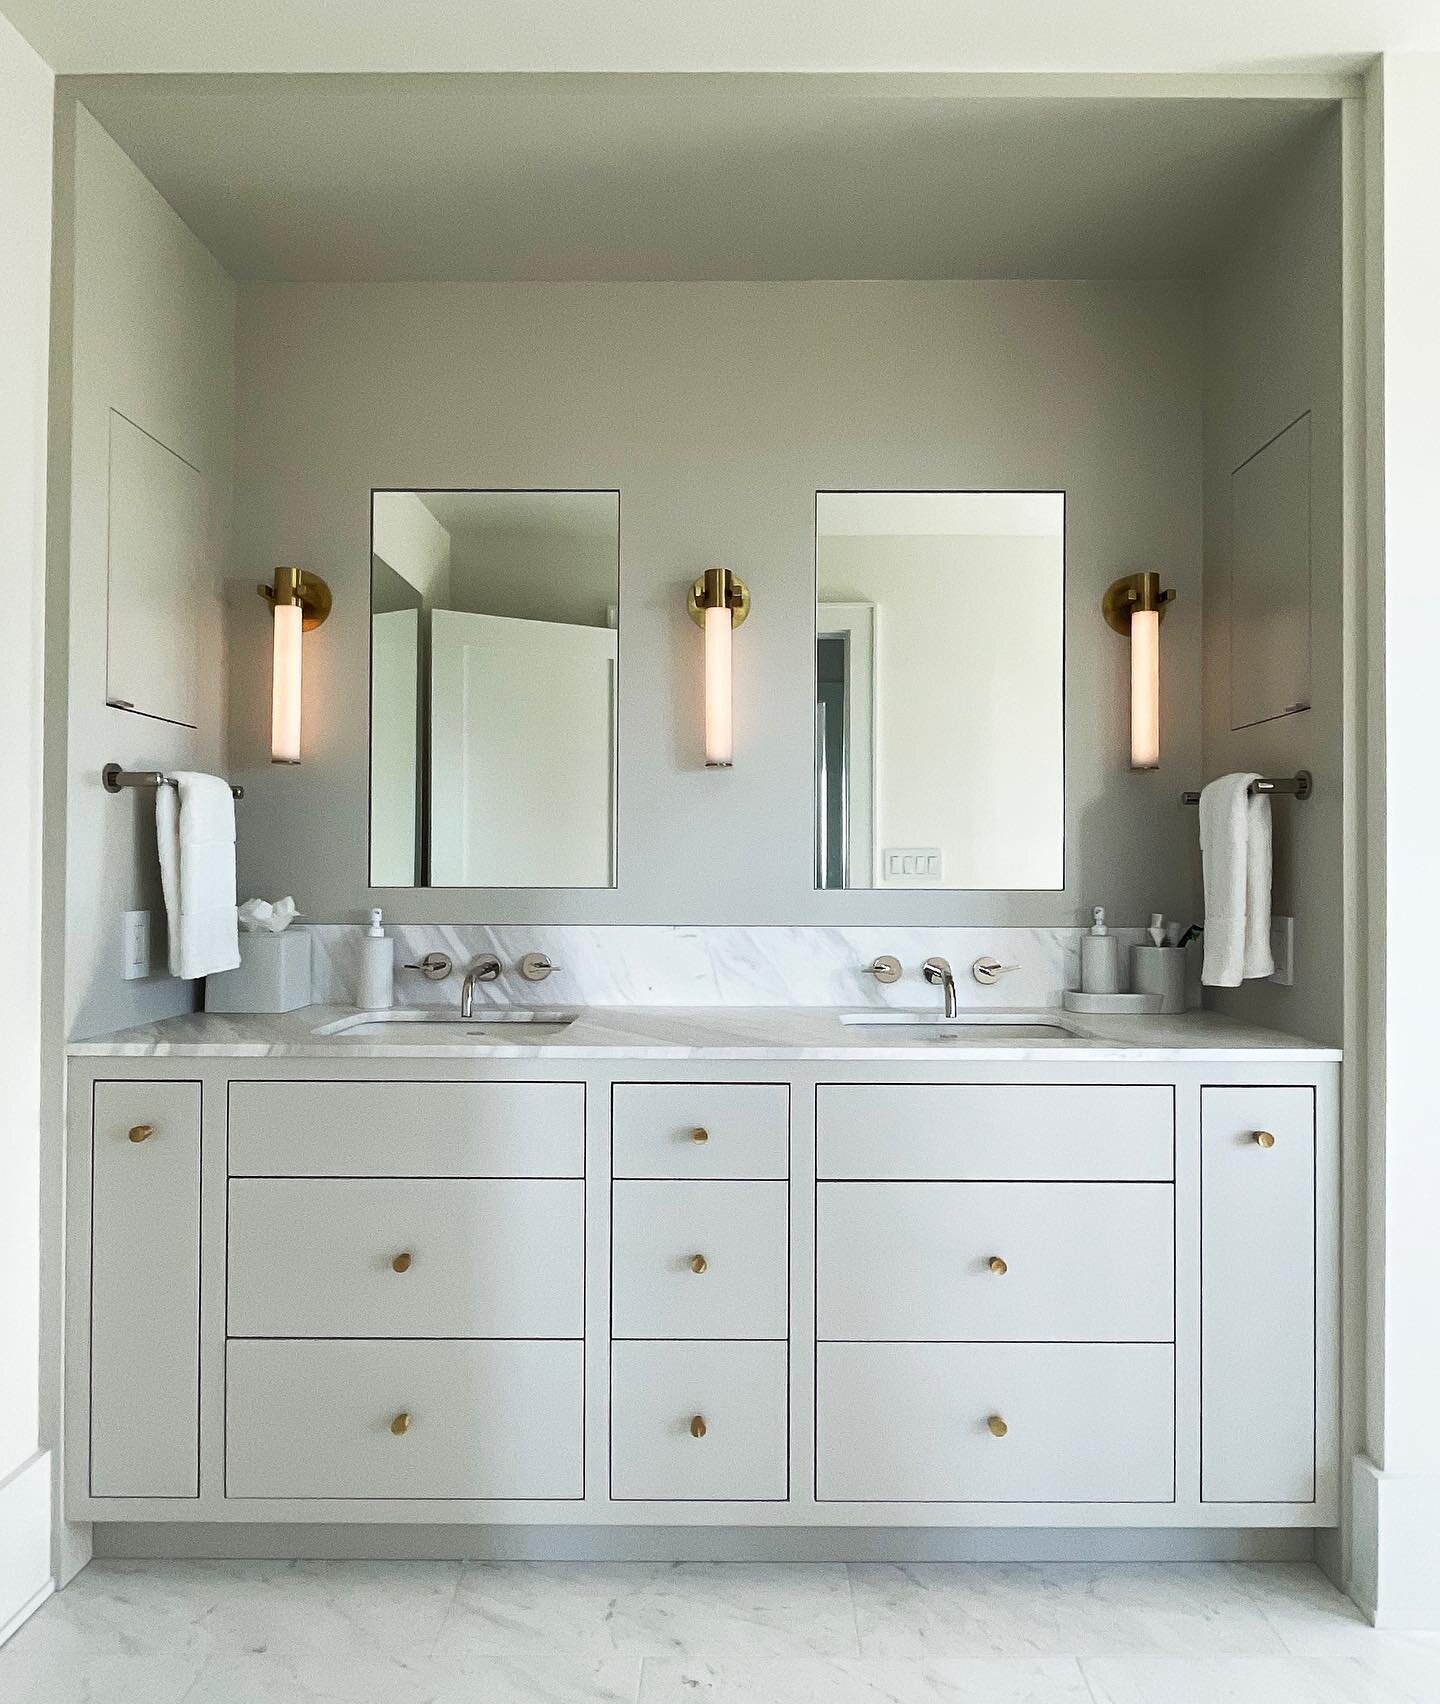 The primary bathroom vanity in the Soundview project located on the north fork of Long Island. The inset custom vanity and cool beige tones create a private moment of luxury. 
Collaboration with @grisorostudio 
Construction by @burger_custom_homes 
.